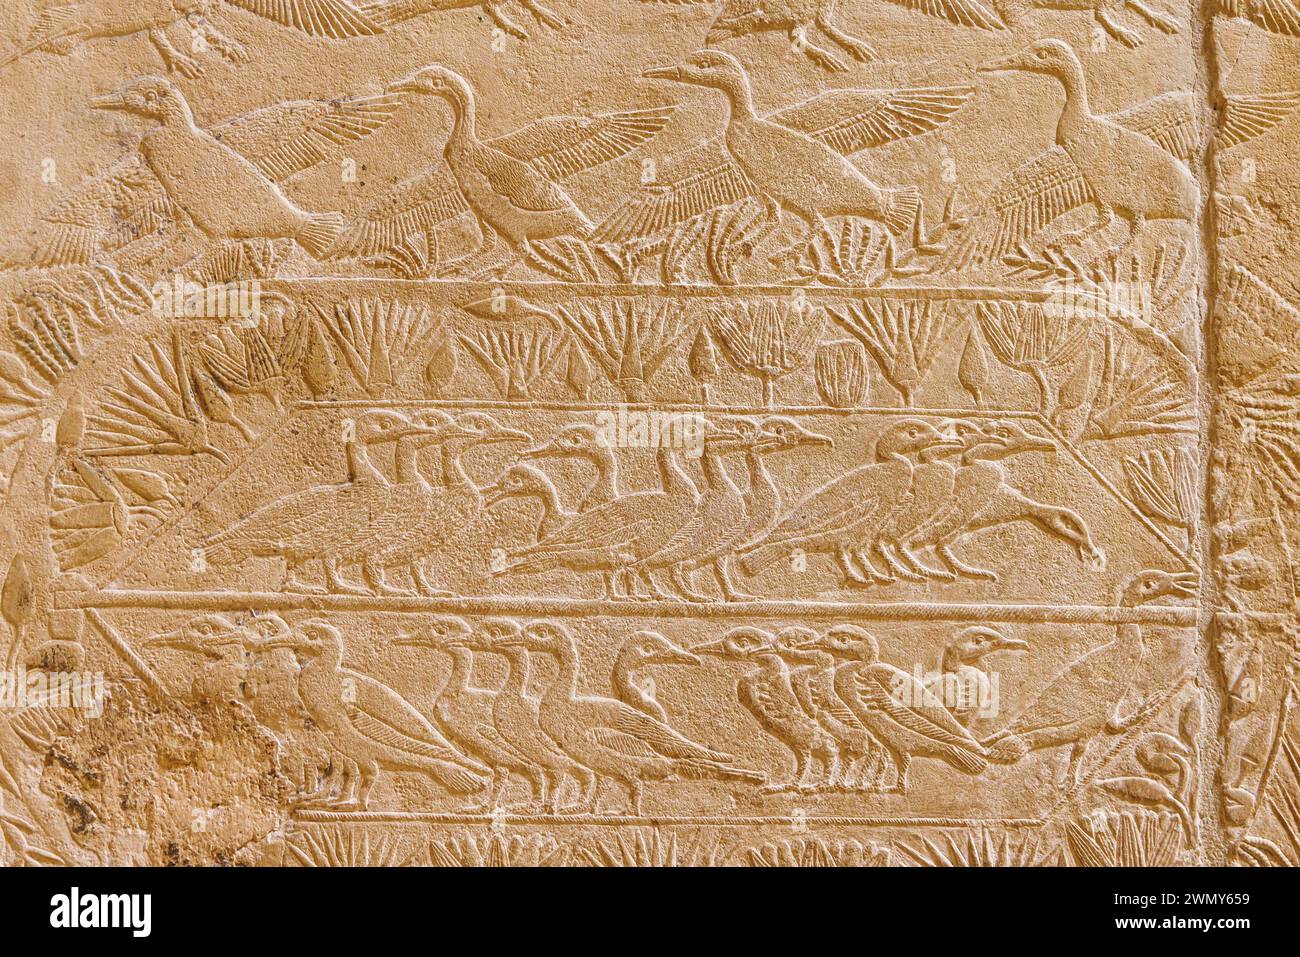 Egypt, Cairo, Saqqara, Memphis and its necropolis, the pyramid fields from Giza to Dahshur listed as World Heritage by UNESCO, Kagemni tomb, ducks Stock Photo